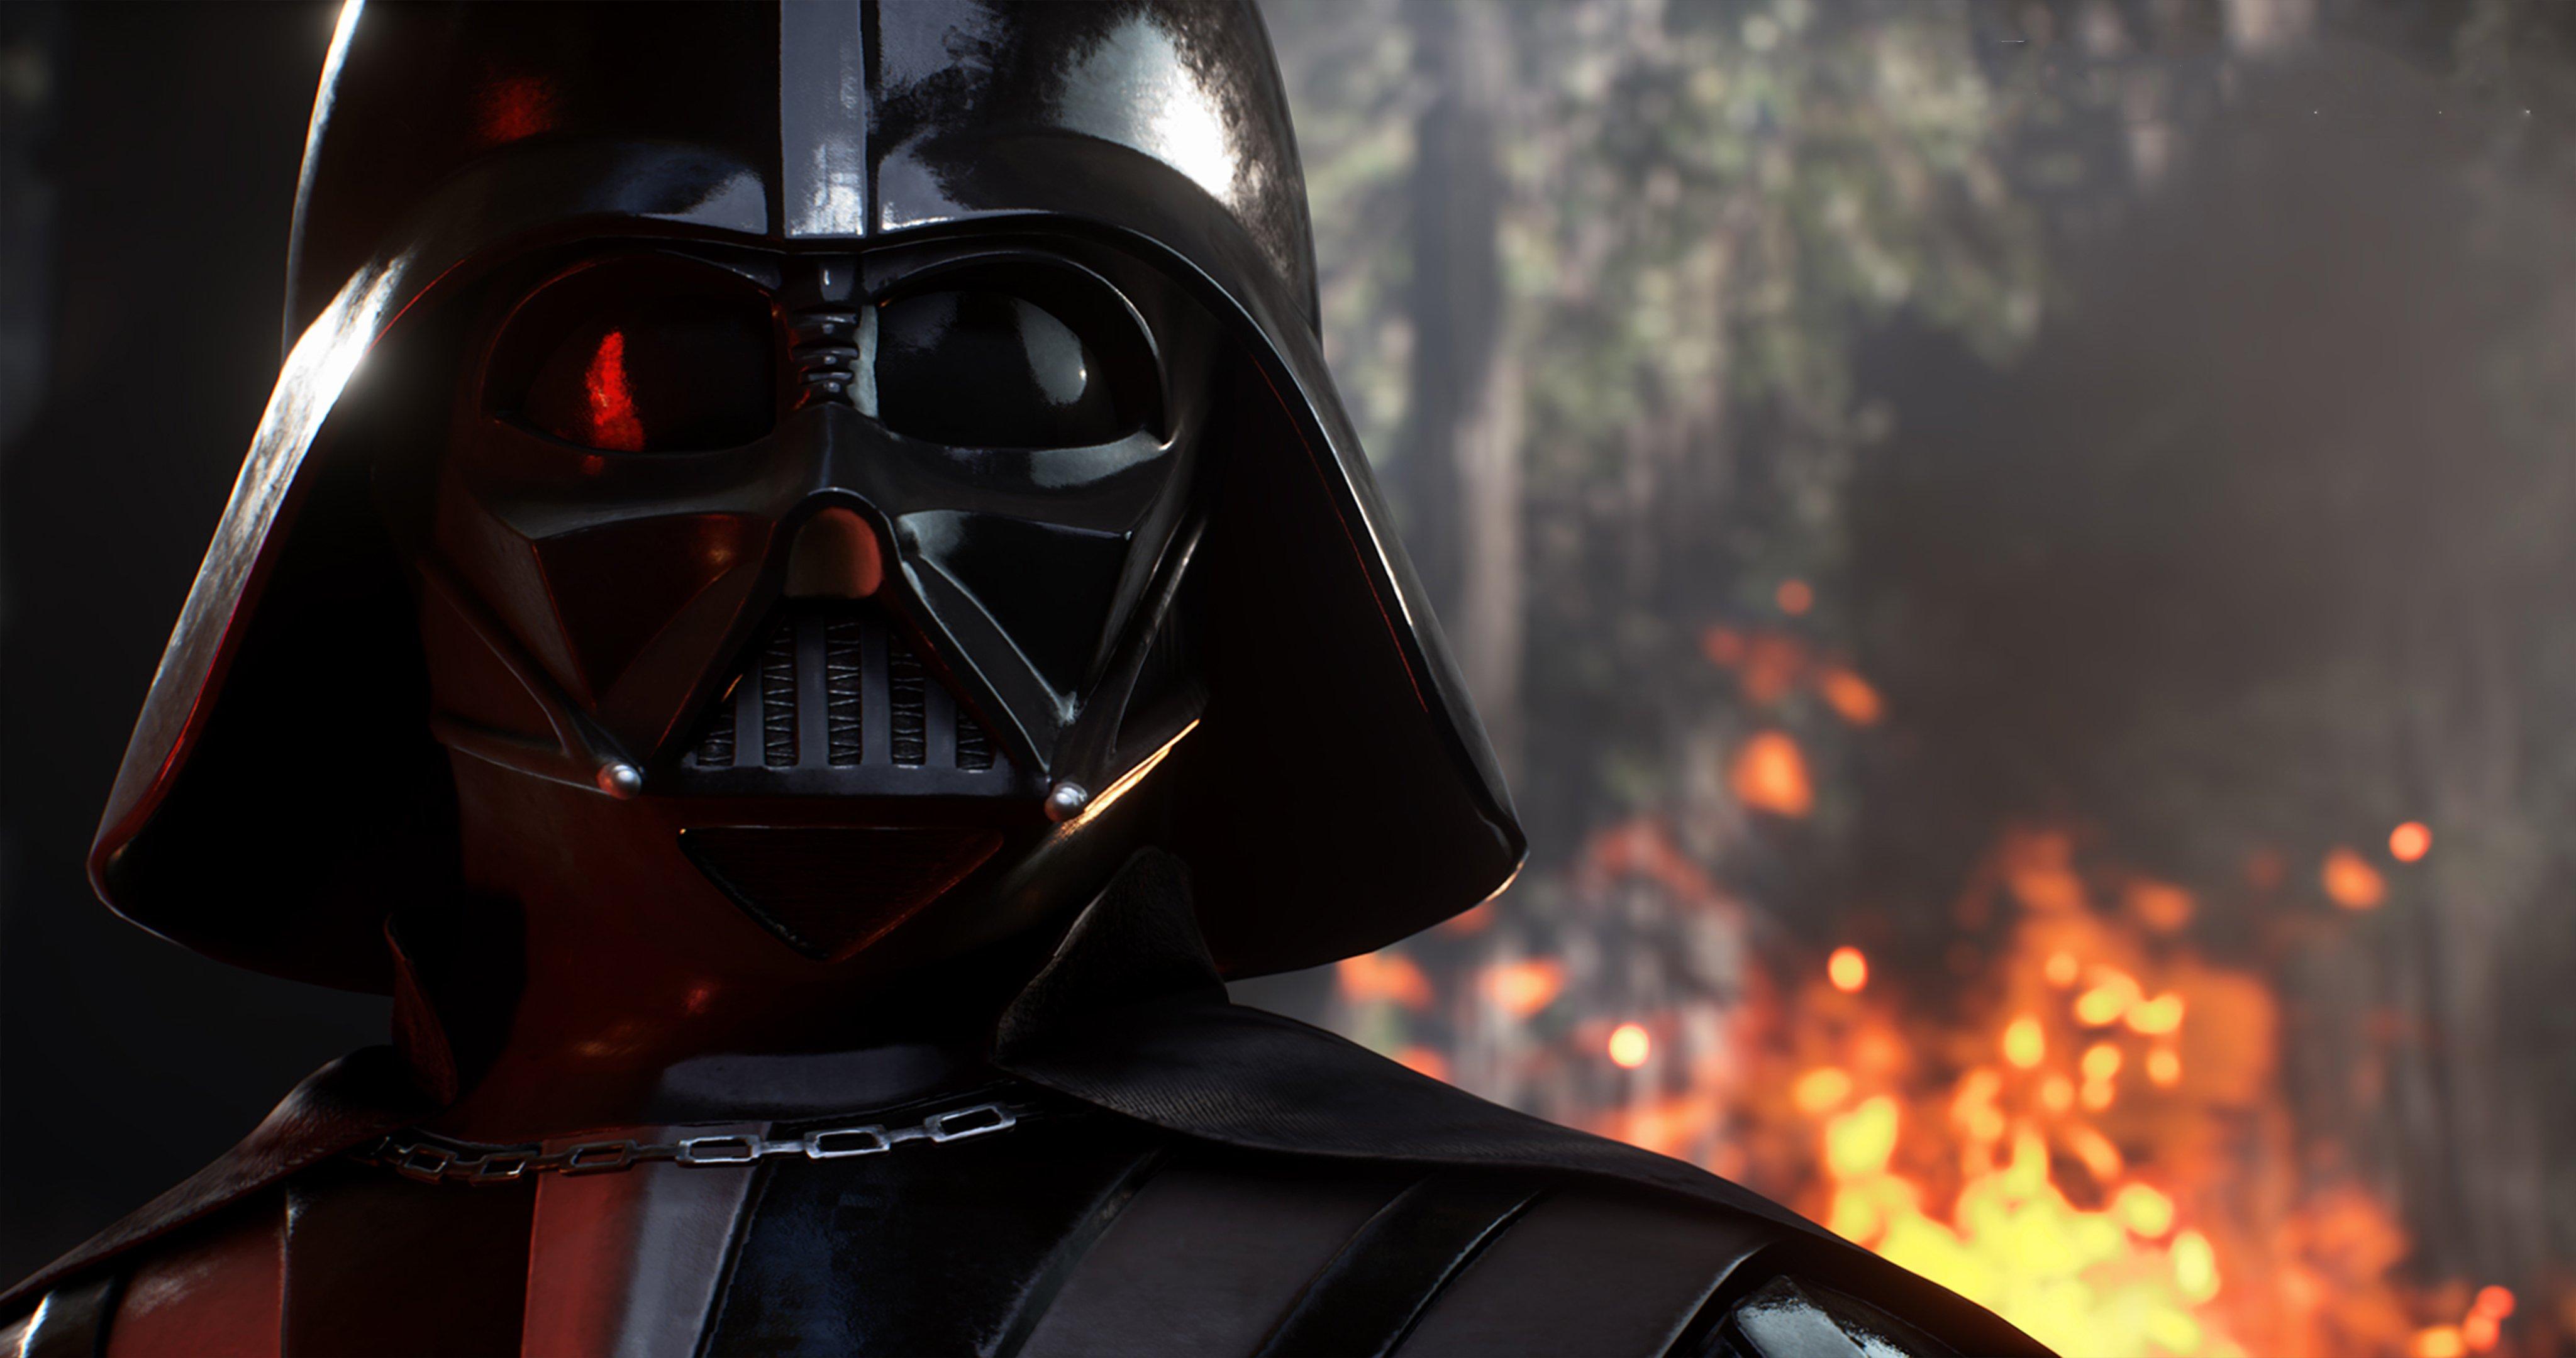 4096 x 2160 · jpeg - Star Wars Battlefront - New Wallpapers HD 1080p | background wallpapers